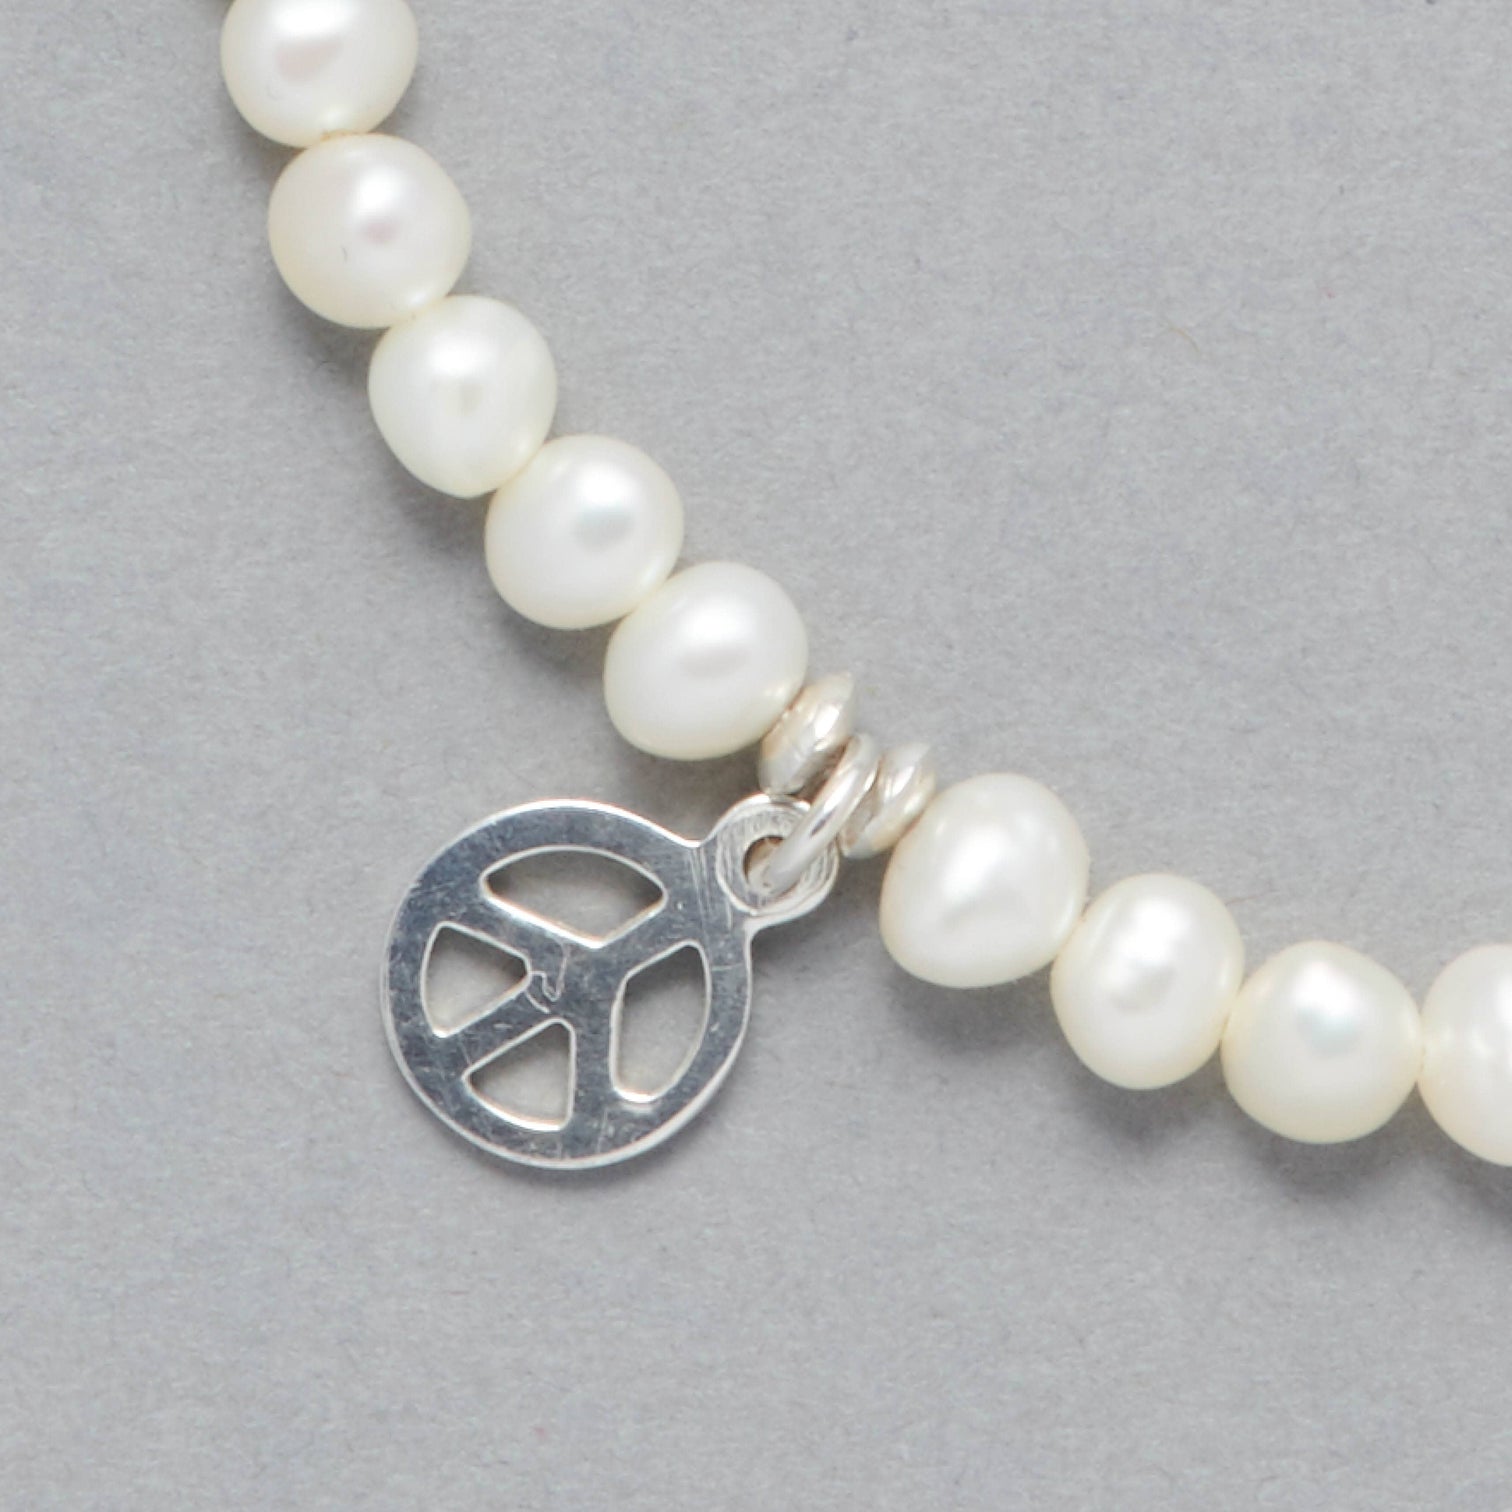 Detail Shot of the Marina Bracelet made with Cultured Freshwater white Pearls and a Sterling Silver Peace Symbol Charm. 